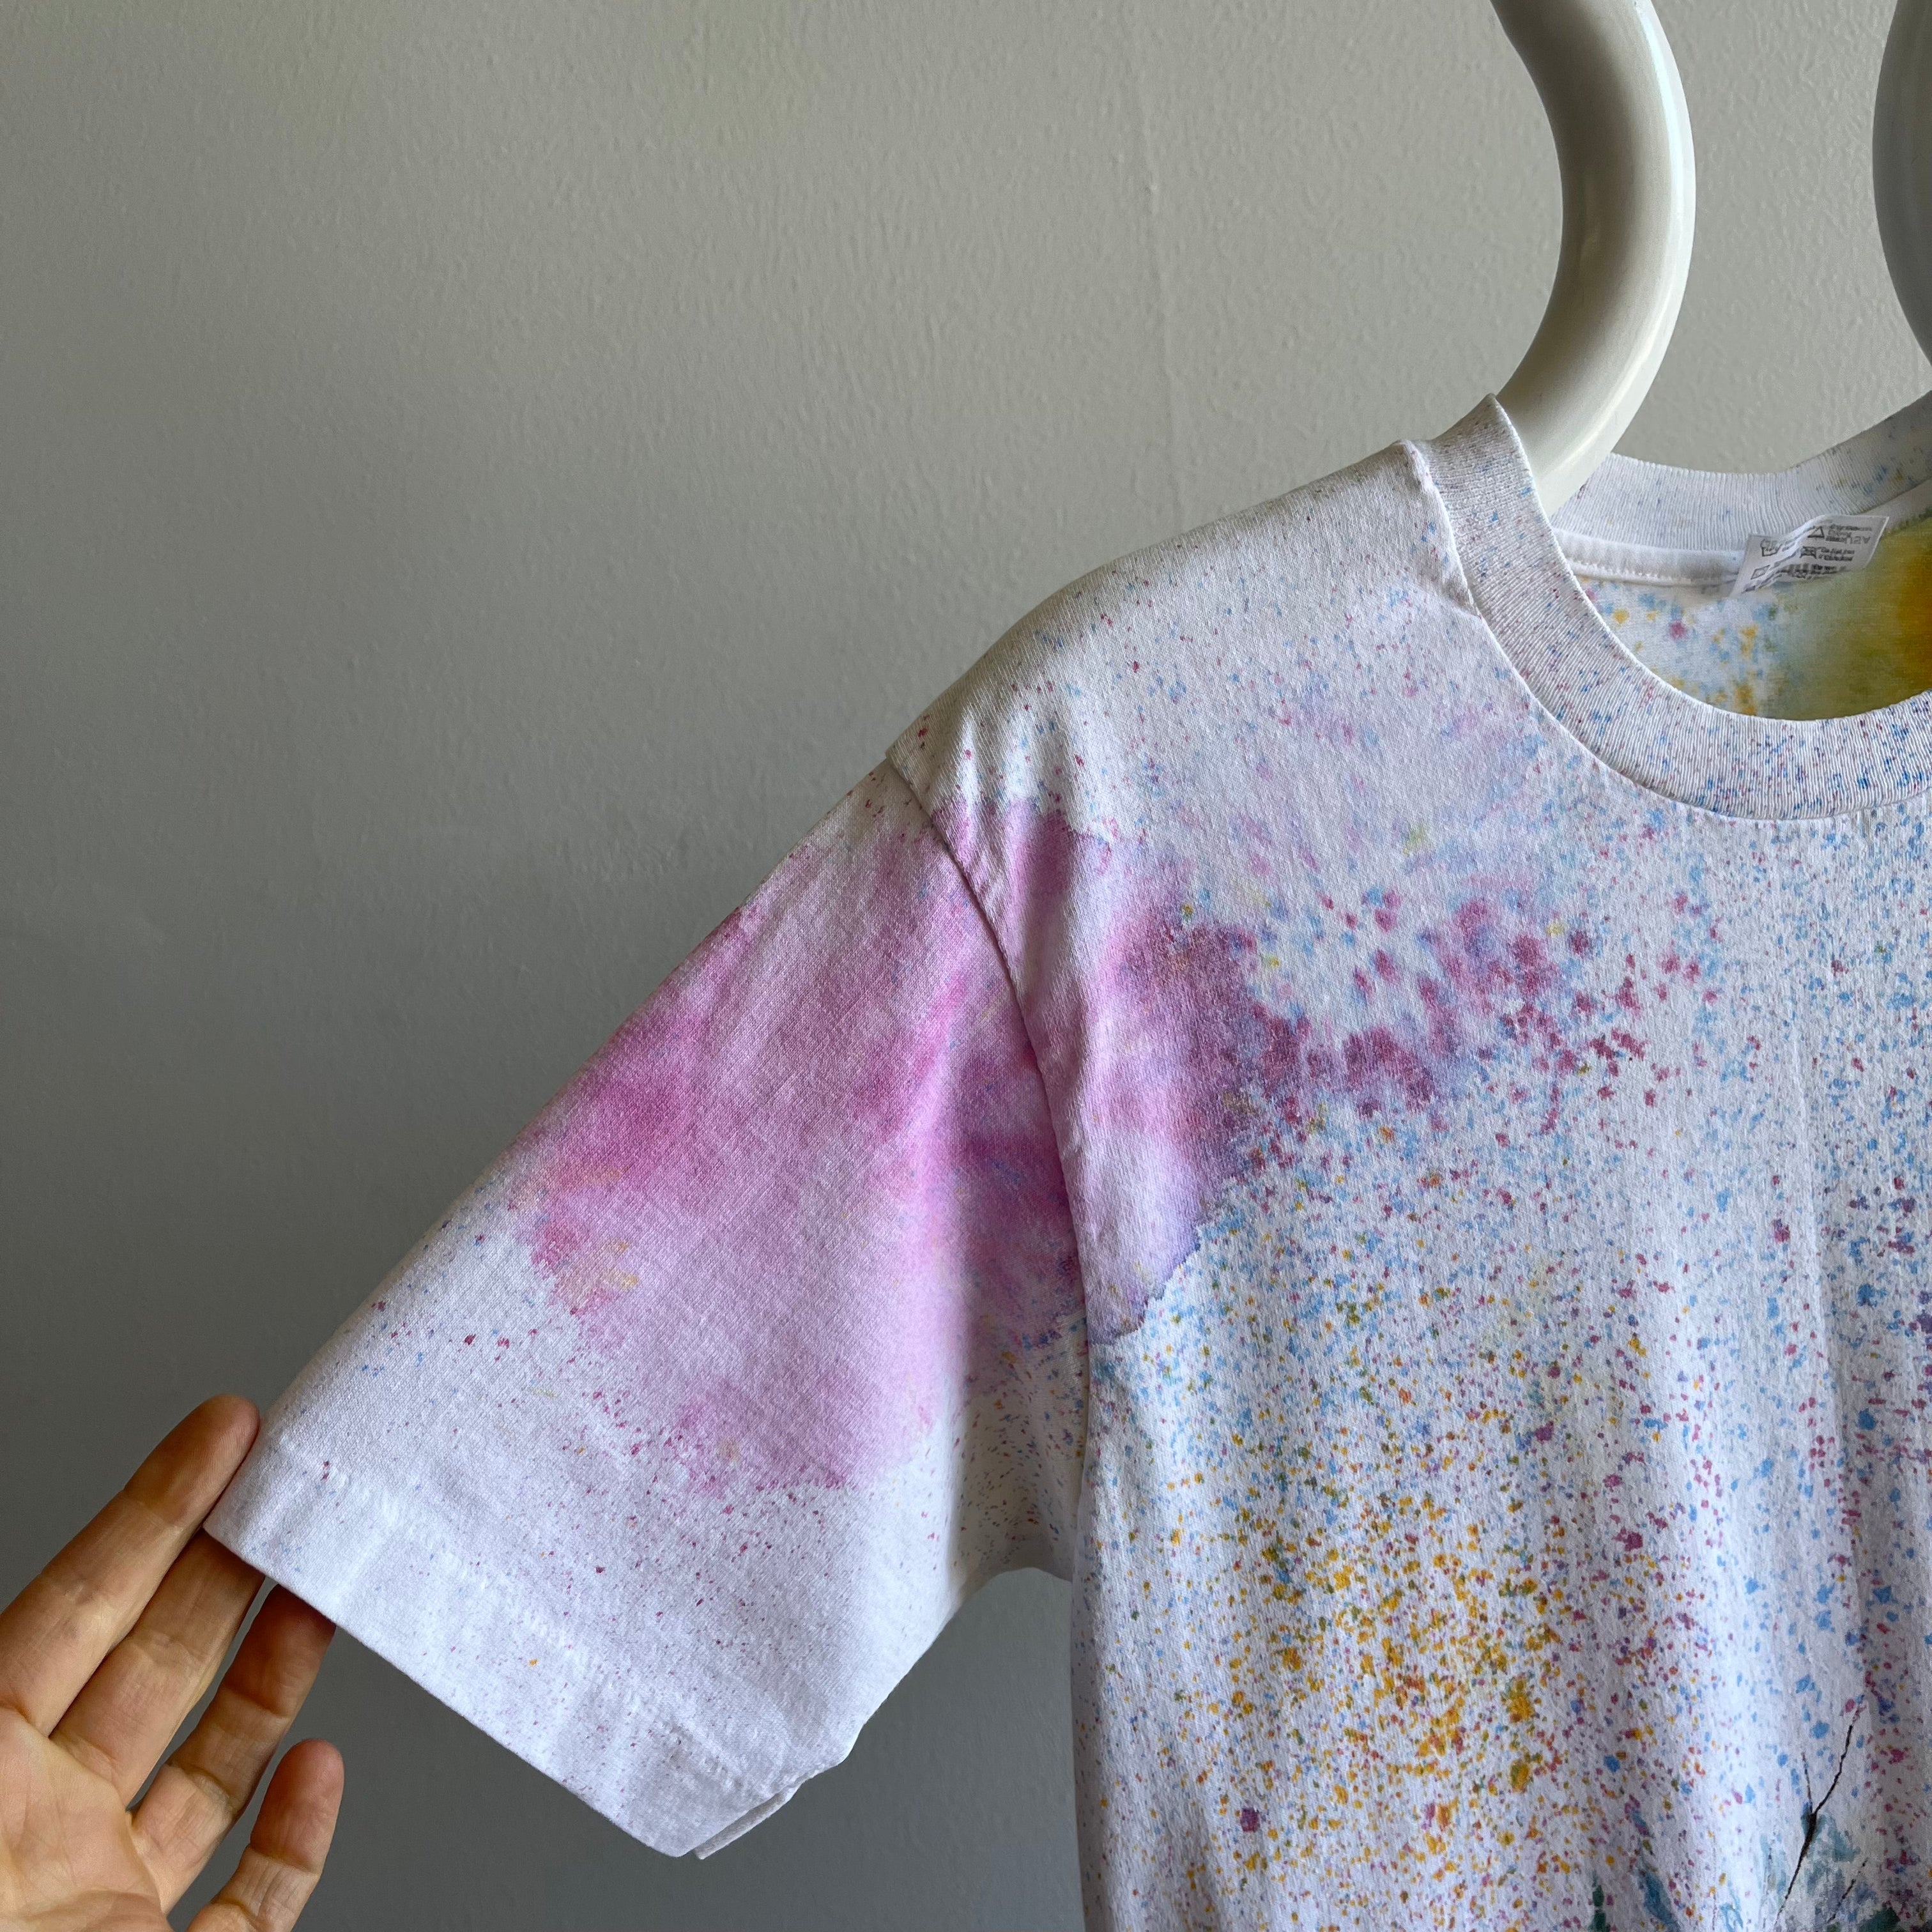 1980s Hand Painted Little Girl on The Prairie DIY T-Shirt